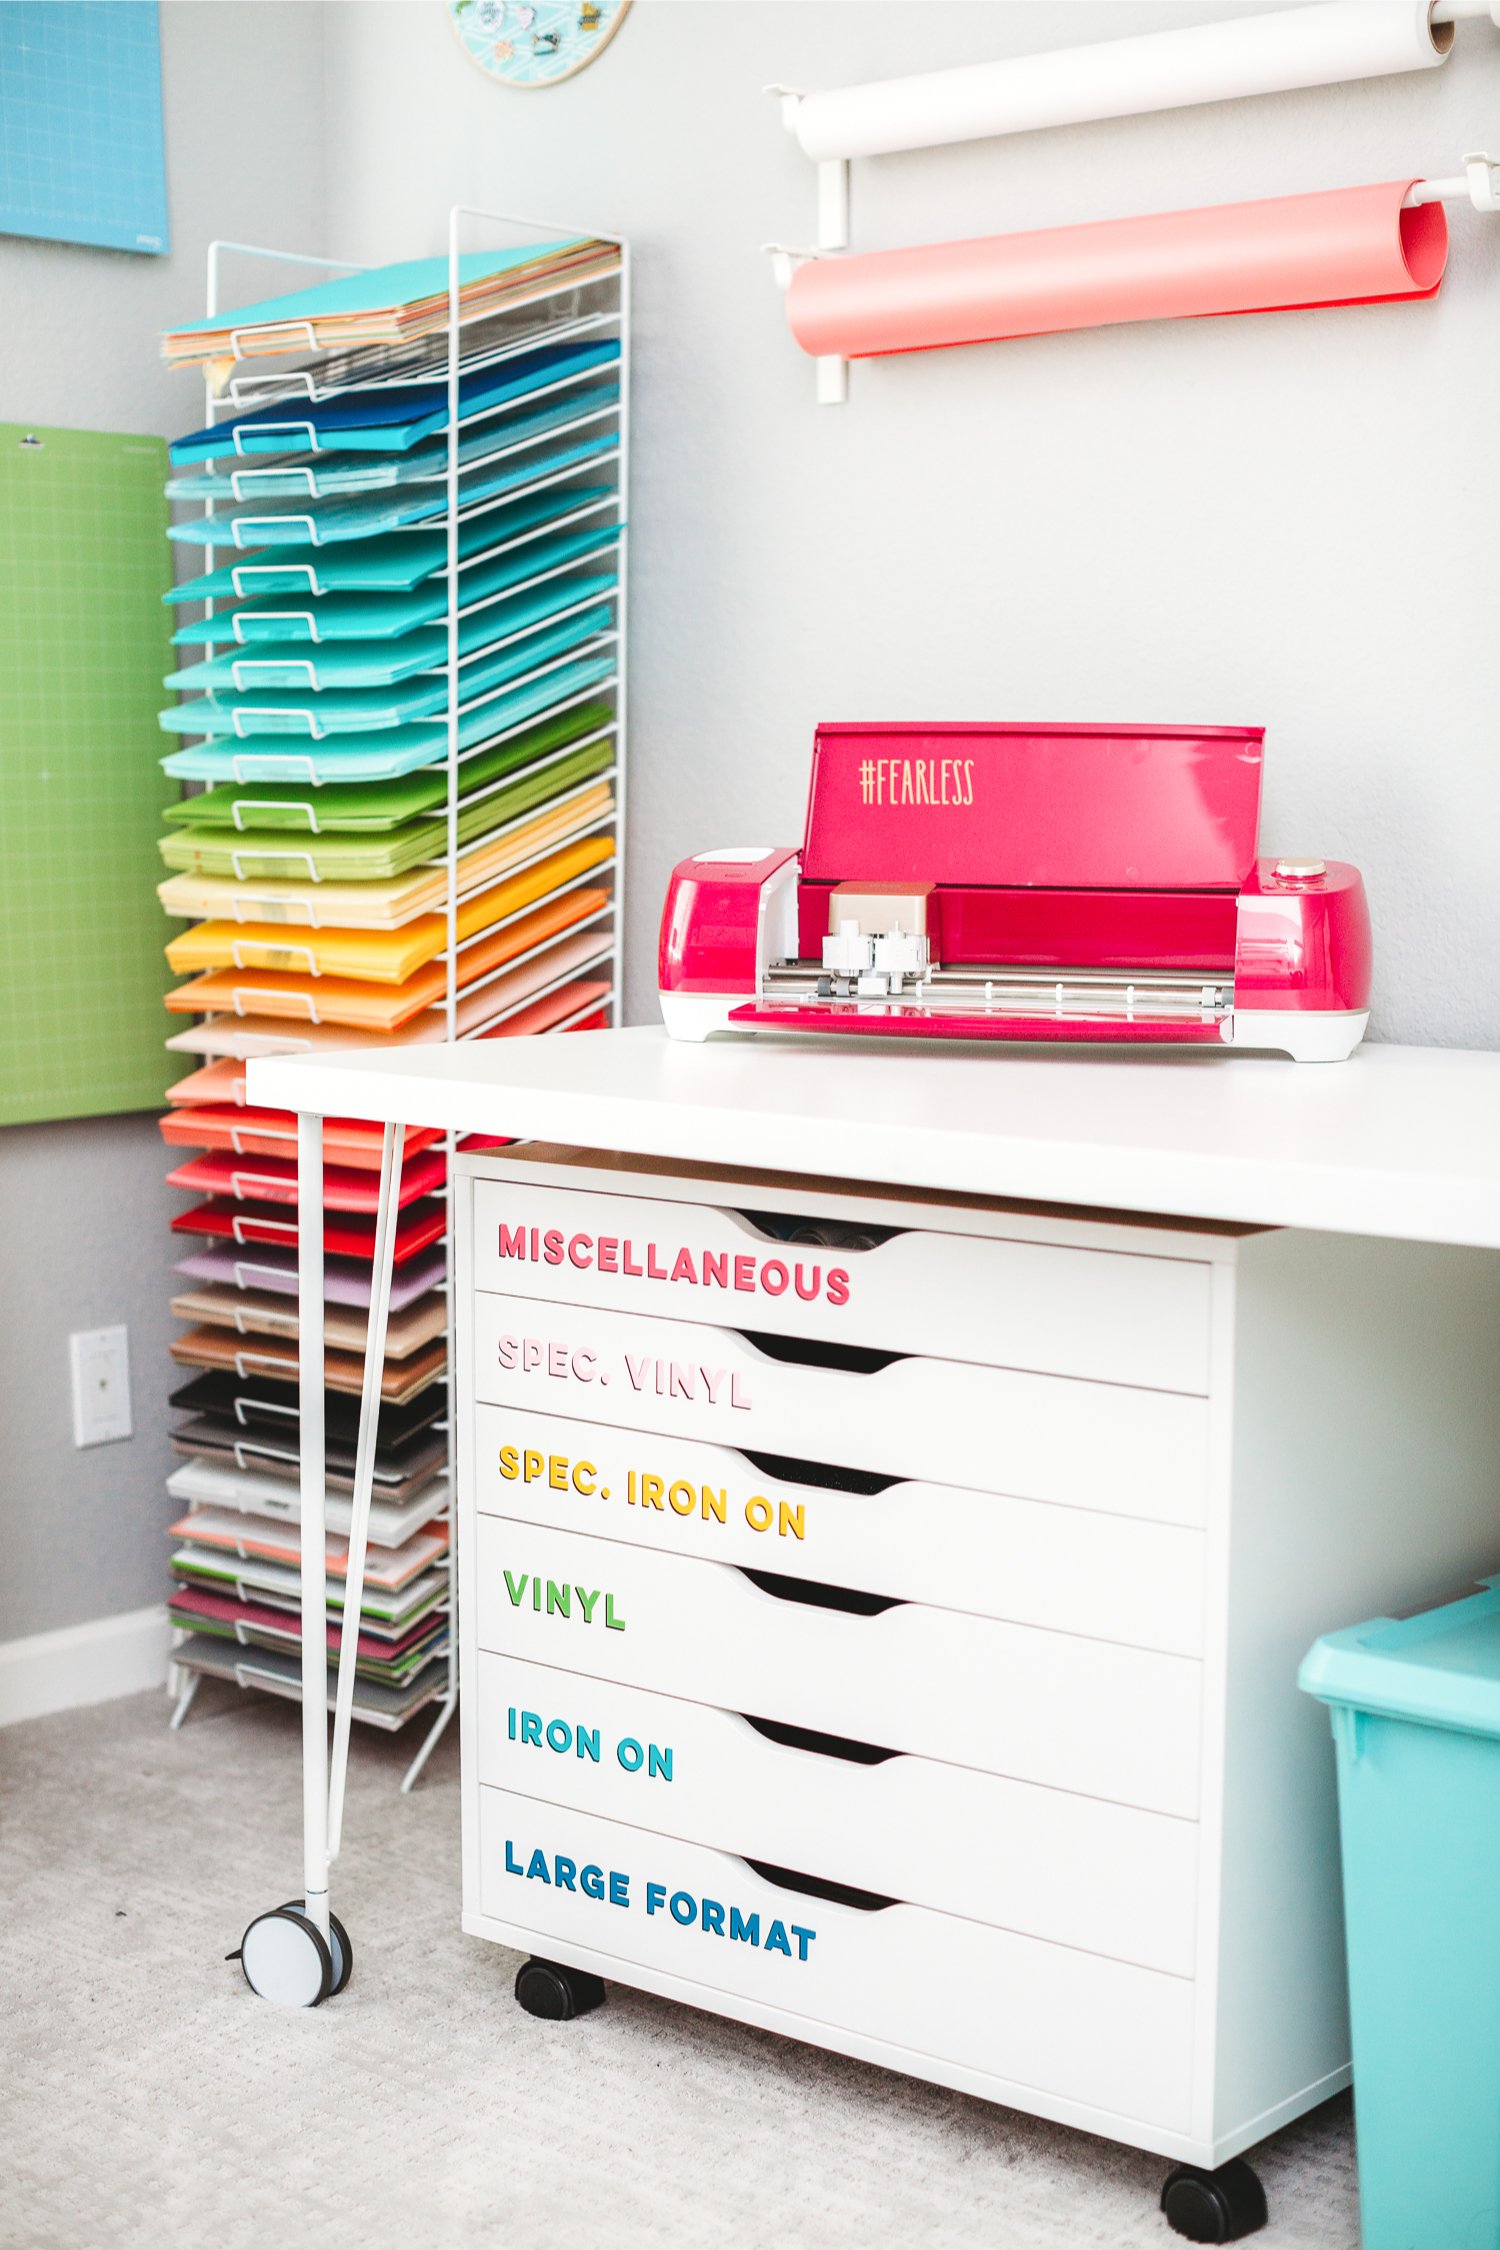 These Craft Room Storage Ideas Can Help You Stay Organized